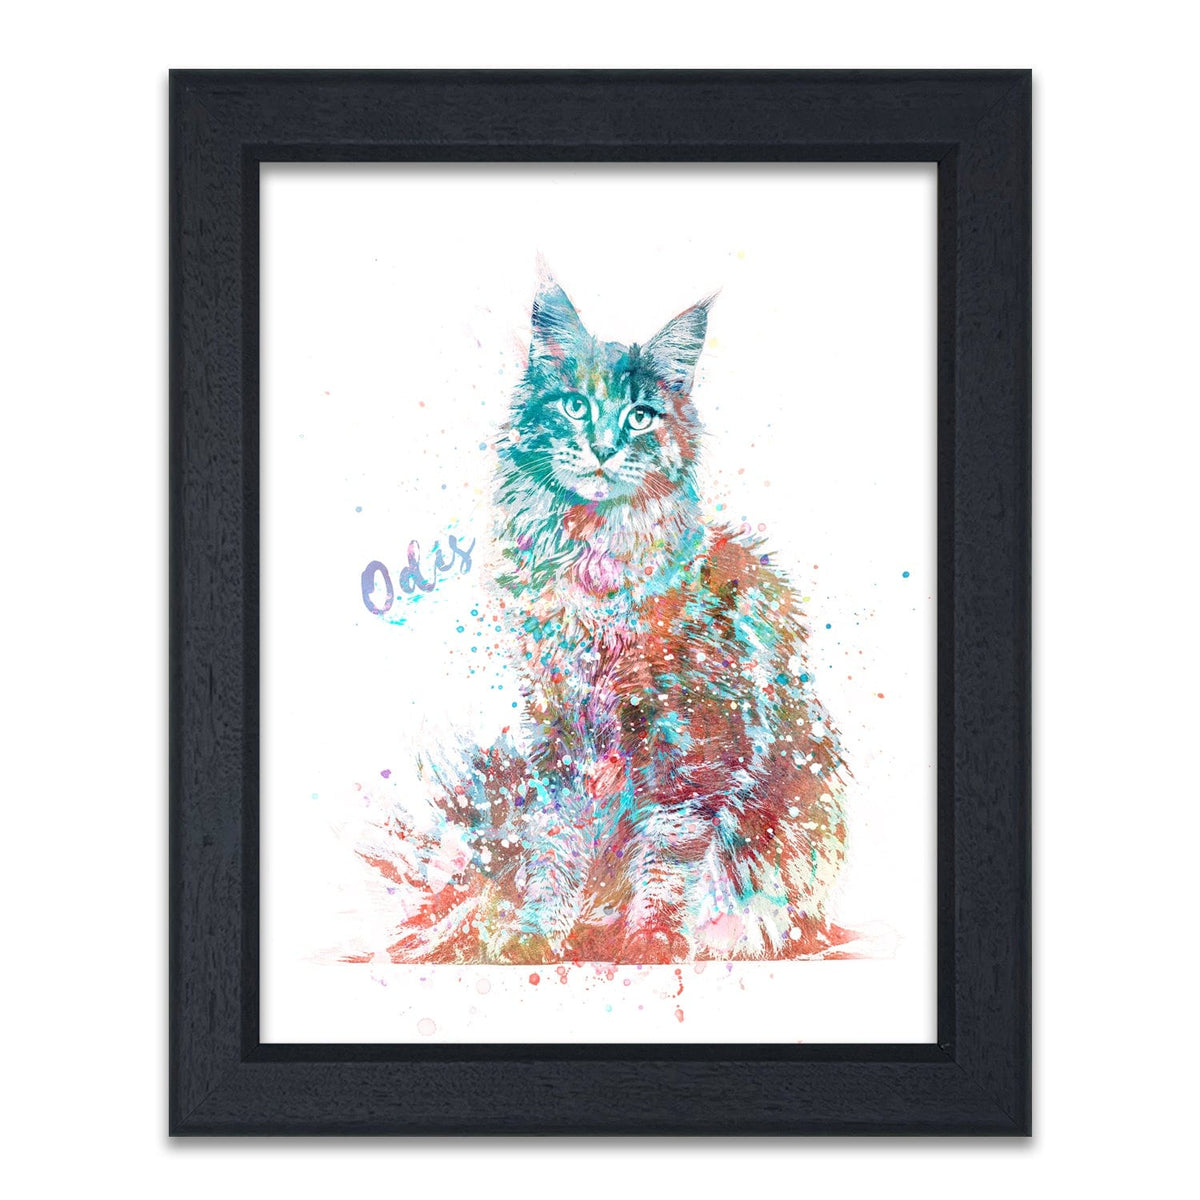 American Longhair Cat Framed Art Decor from Personal-Prints